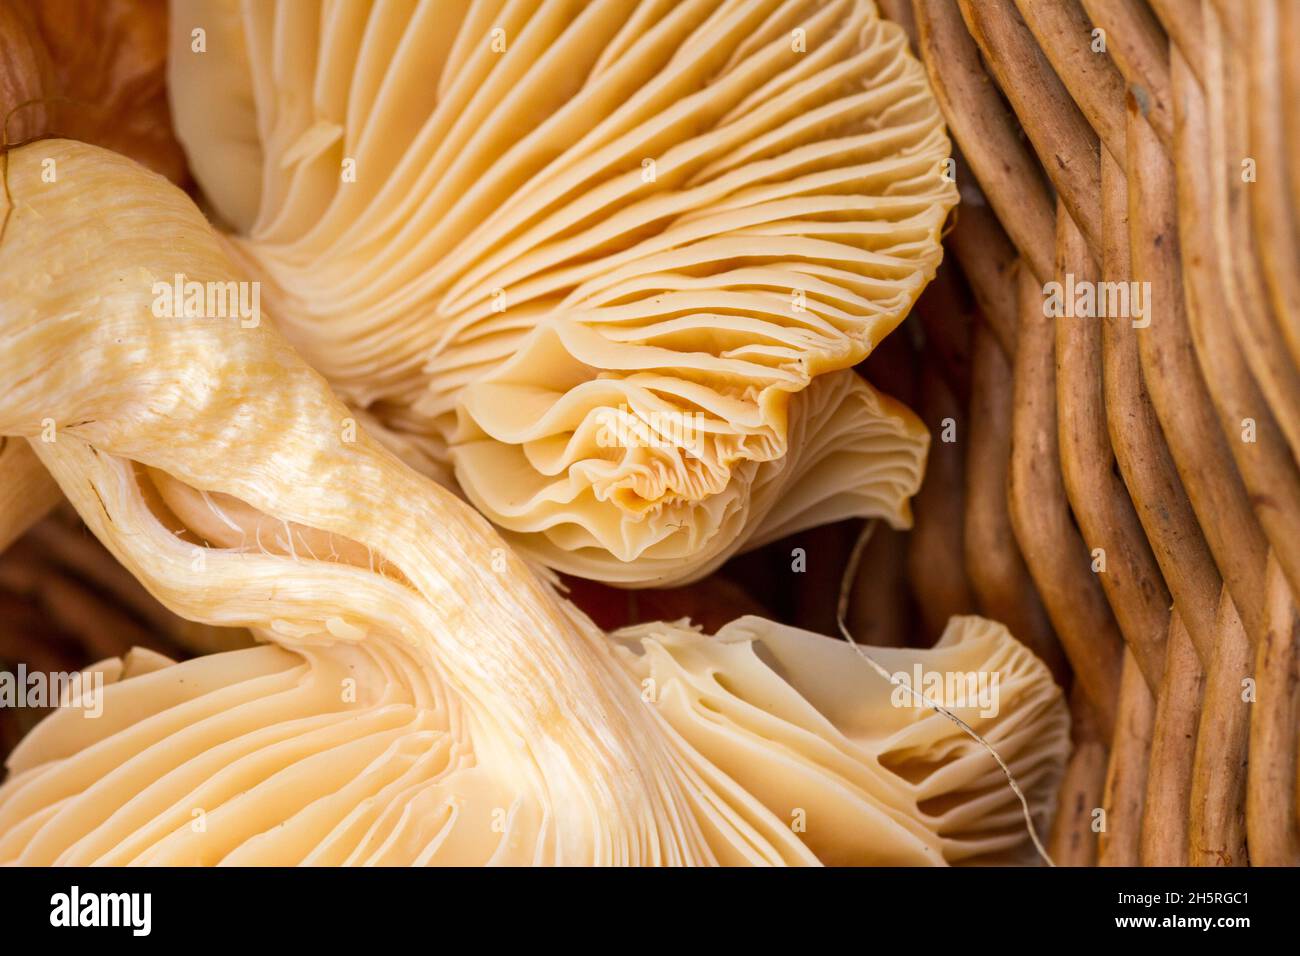 Wax cap mushroom in basket after foraging. Stock Photo